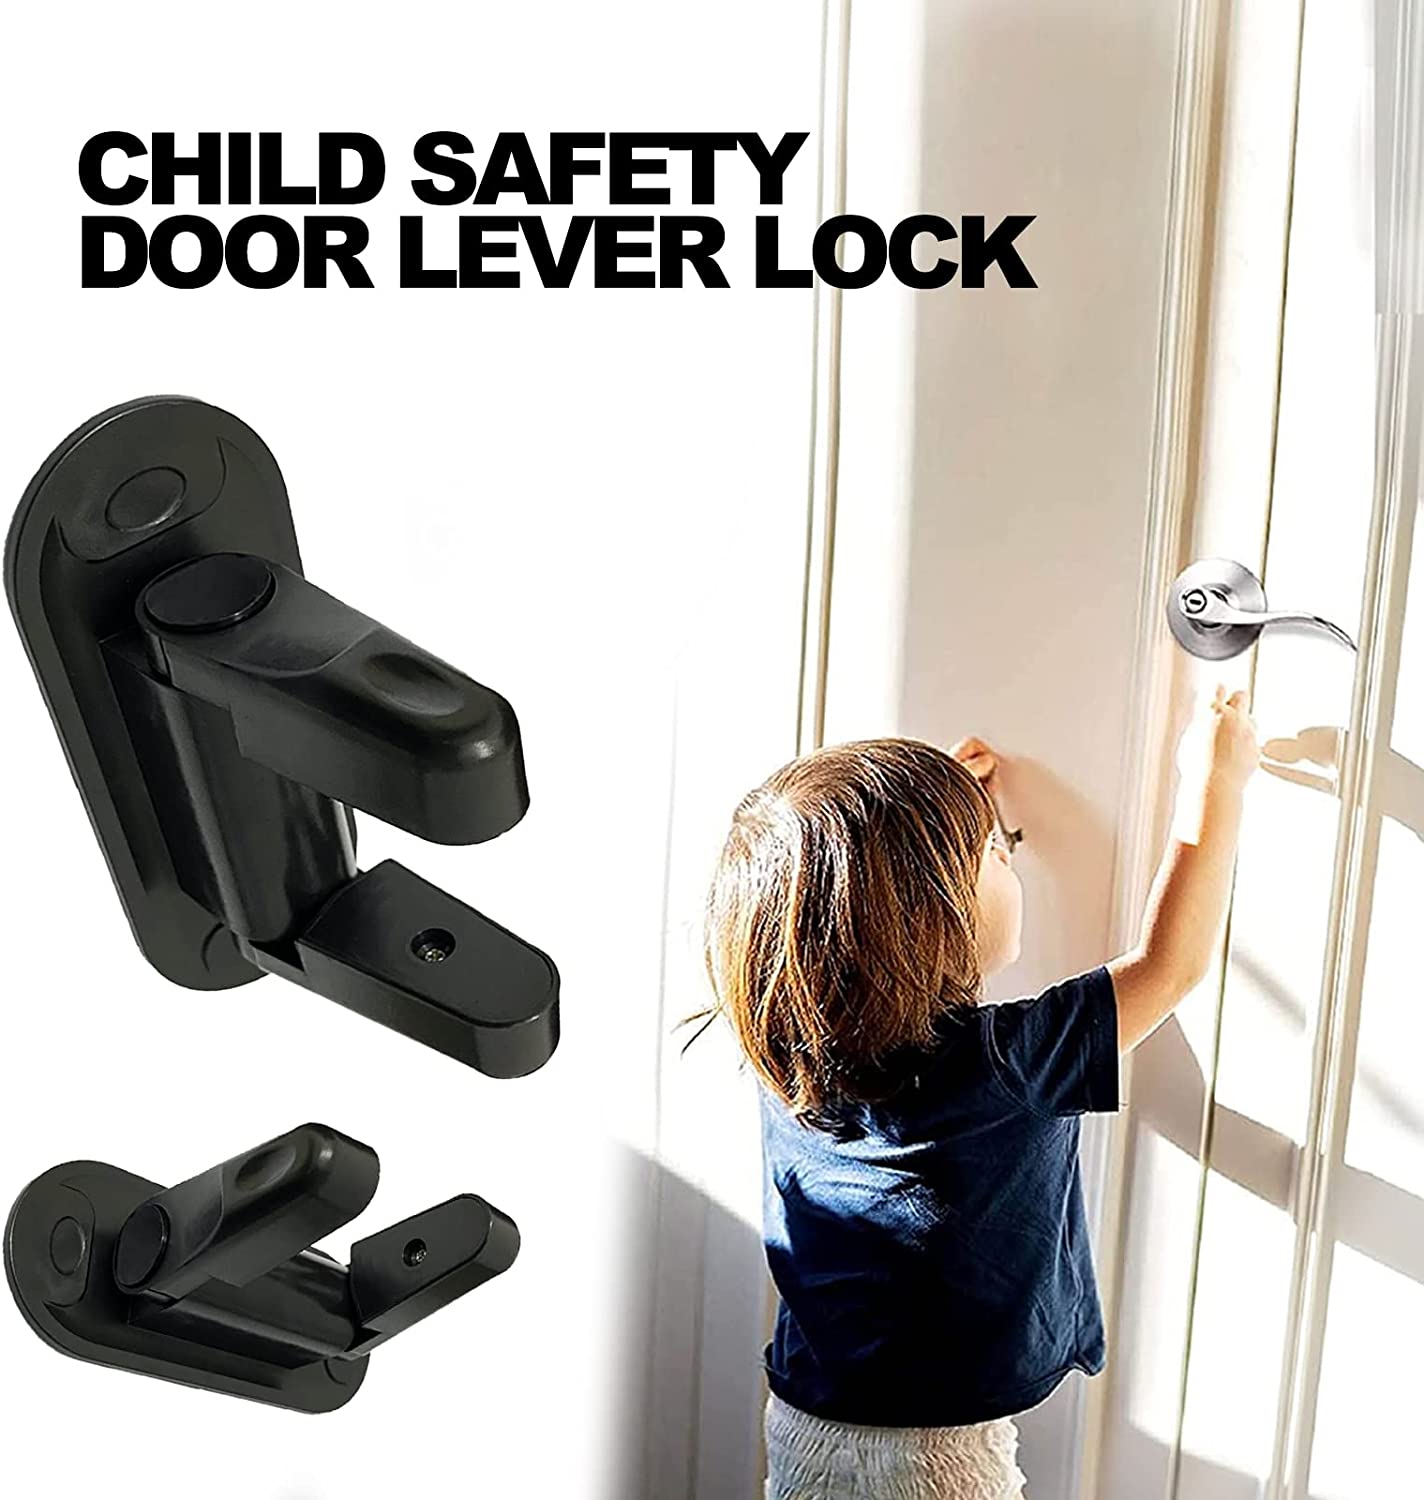 Door Lever Baby Safety Lock, 2PCS Childproof Door Lever Lock & Handles  Adhesive, Baby Door Lock Safety Locks to Protect Child Safety, Black 